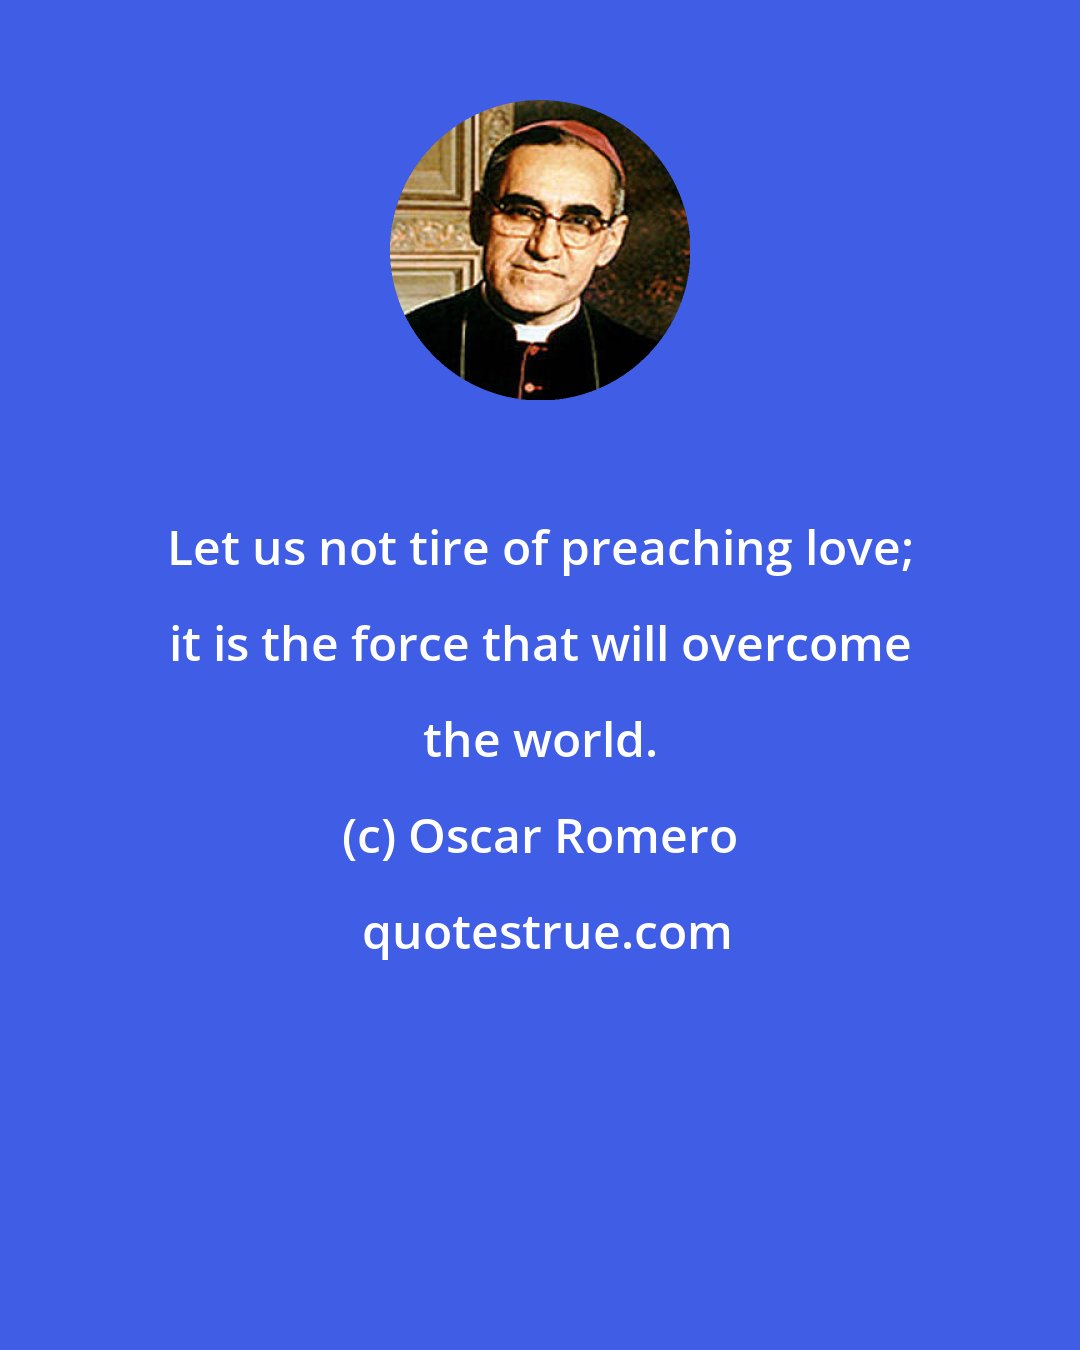 Oscar Romero: Let us not tire of preaching love; it is the force that will overcome the world.